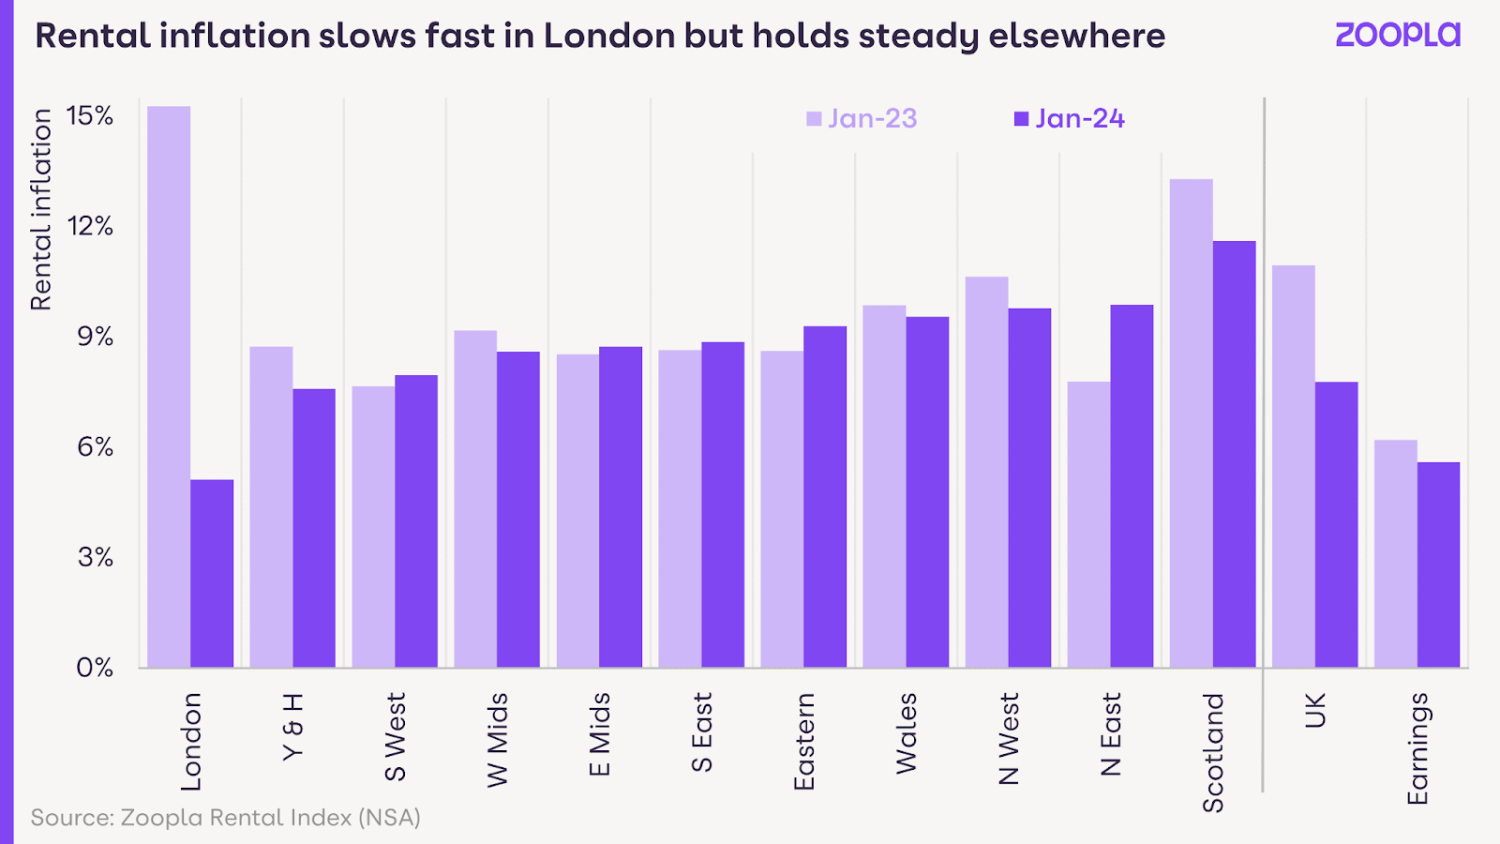 Graph showing rental inflation slows fast in London but holds steady elsewhere